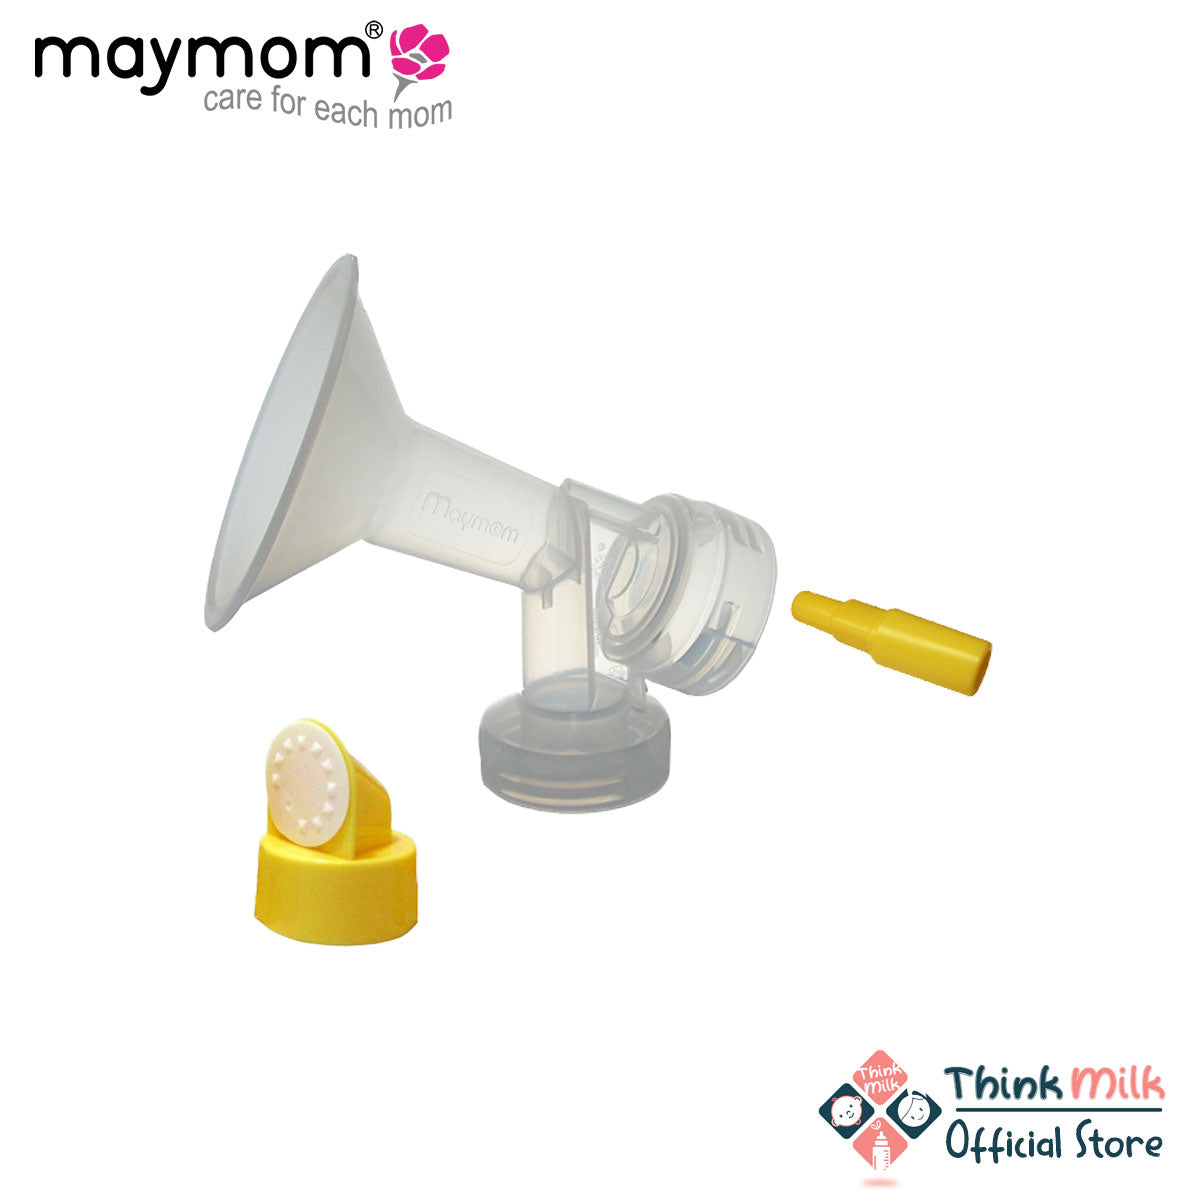 Maymom Narrow Neck One-piece Flange with Valve and Membrane